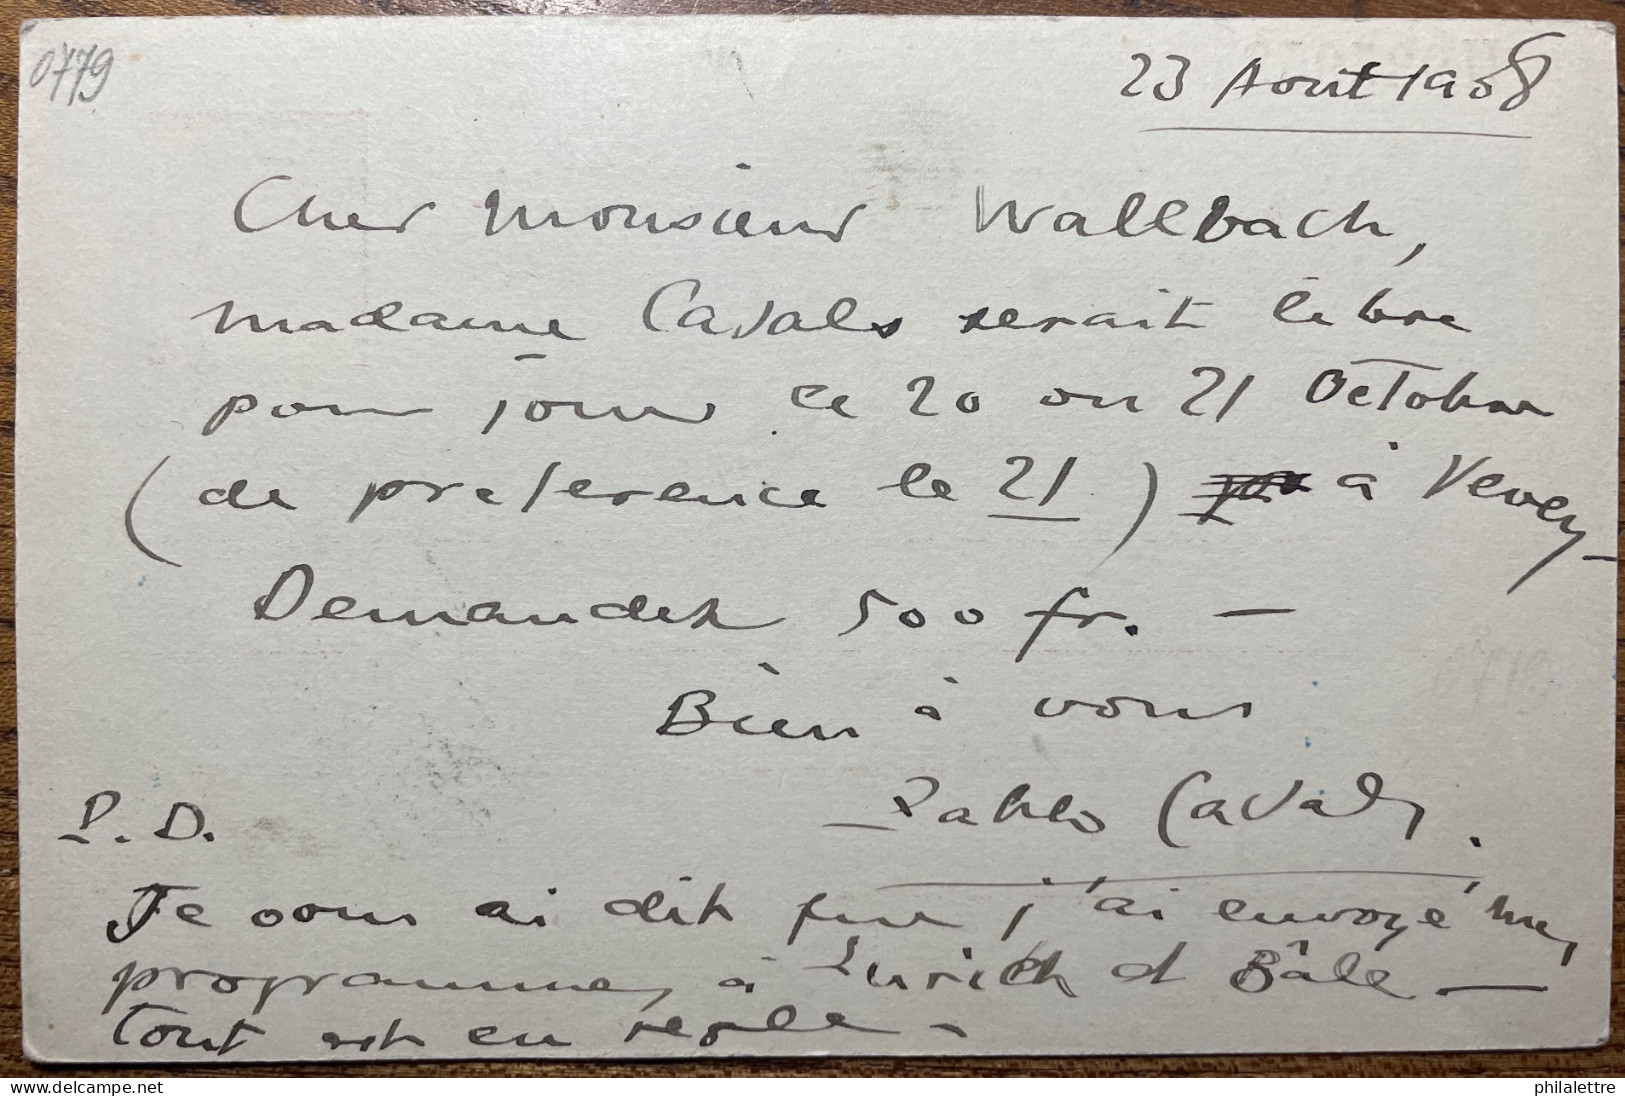 PABLO (PAU) CASALS (1876-1973) Signed 1908 Postal Card From VENDRELL With Autograph Text Addressed To Switzerland - Sänger Und Musiker